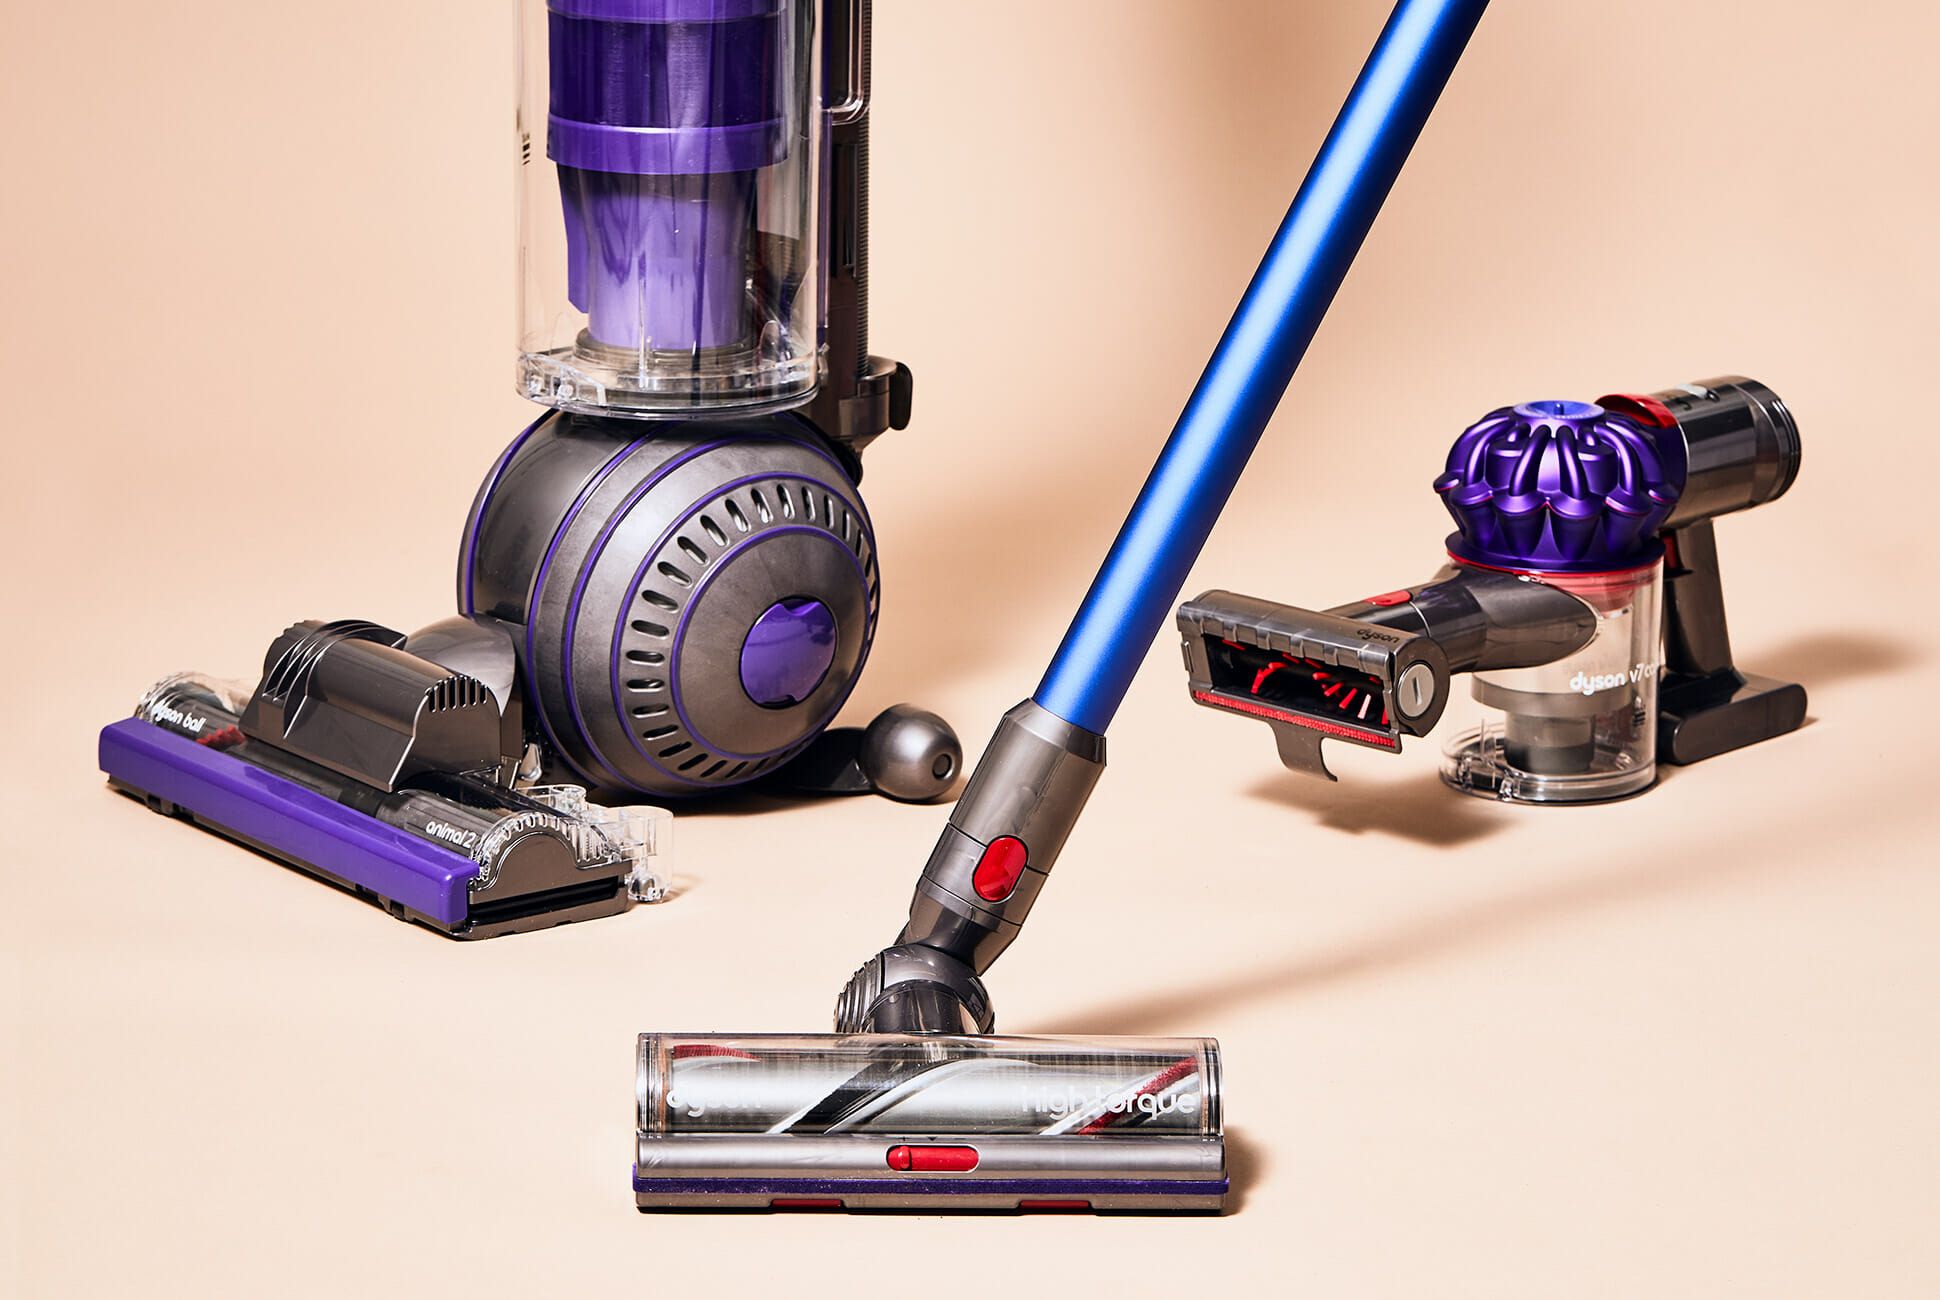 nåde mangel Palads The Complete Buying Guide to Dyson Vacuums: Every Model Explained